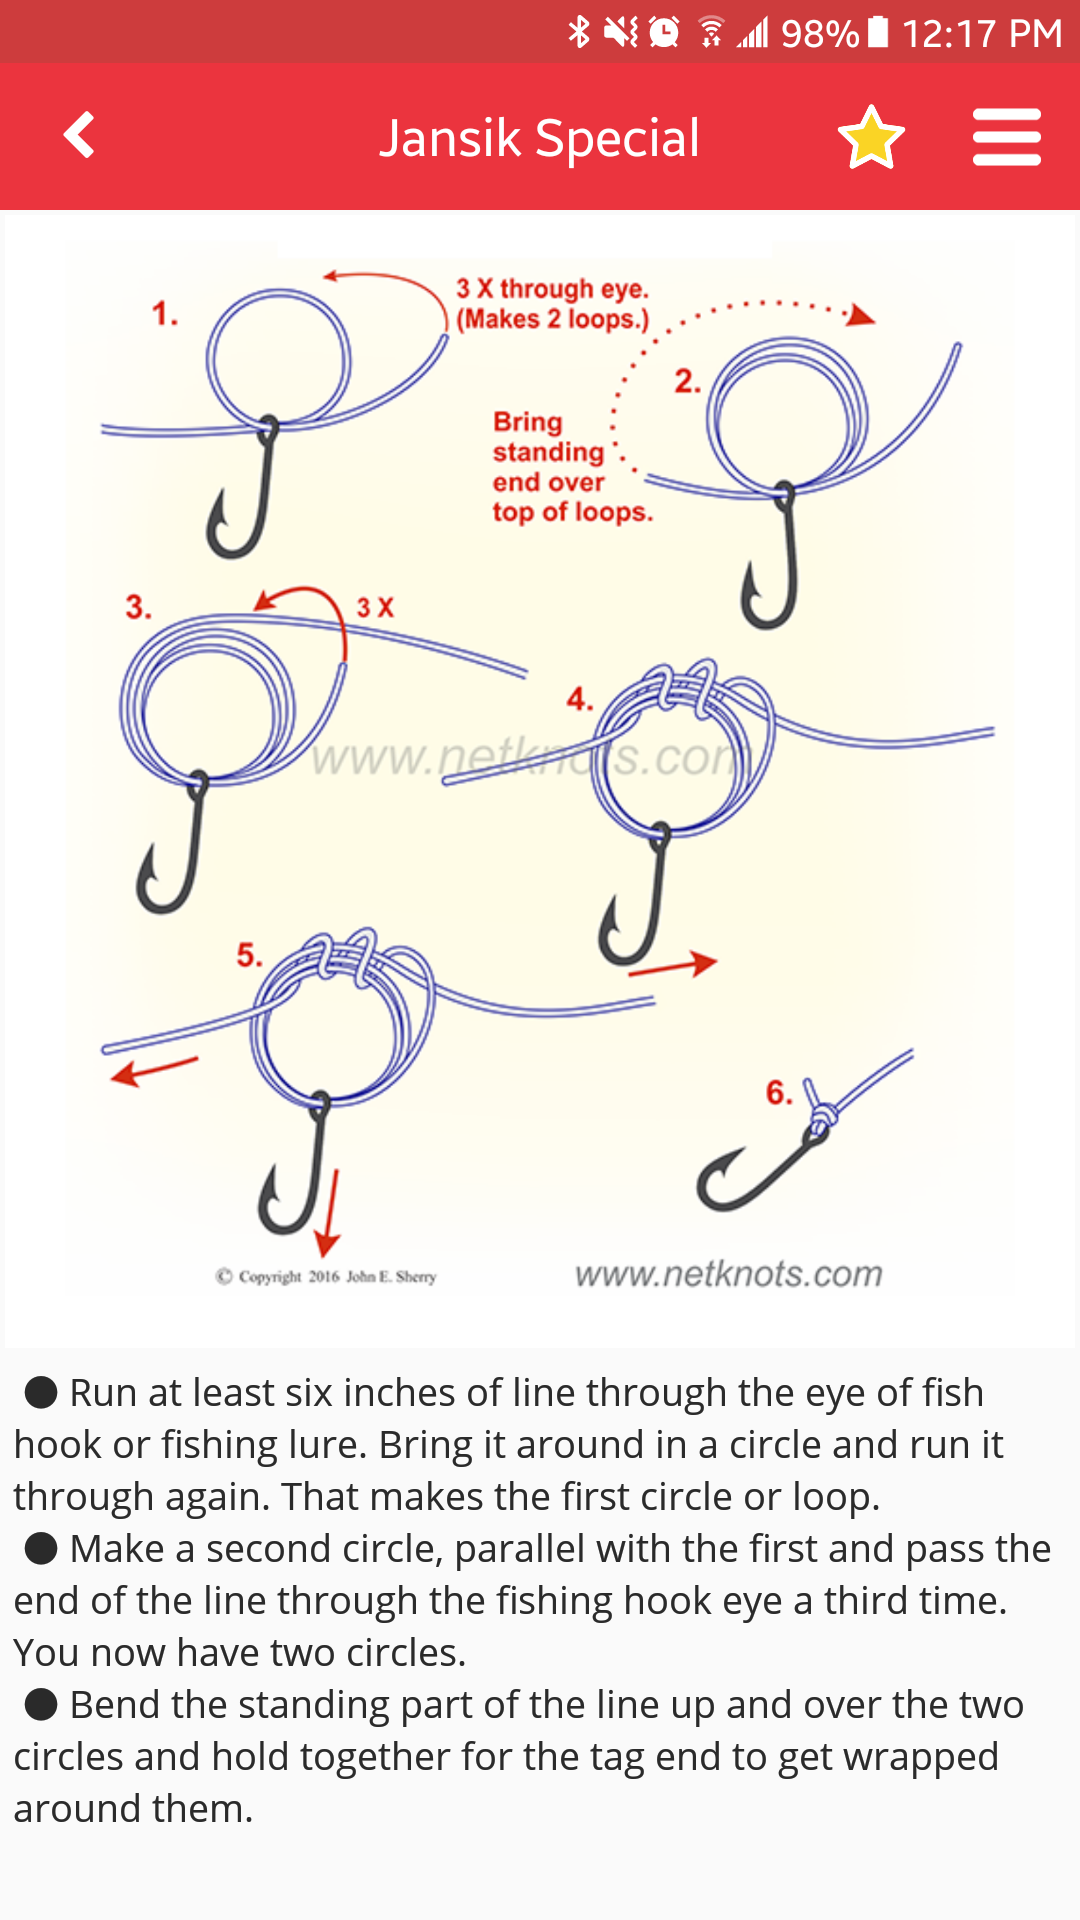 Issue with Palomar knot and copolymer line. - Fishing Rods, Reels